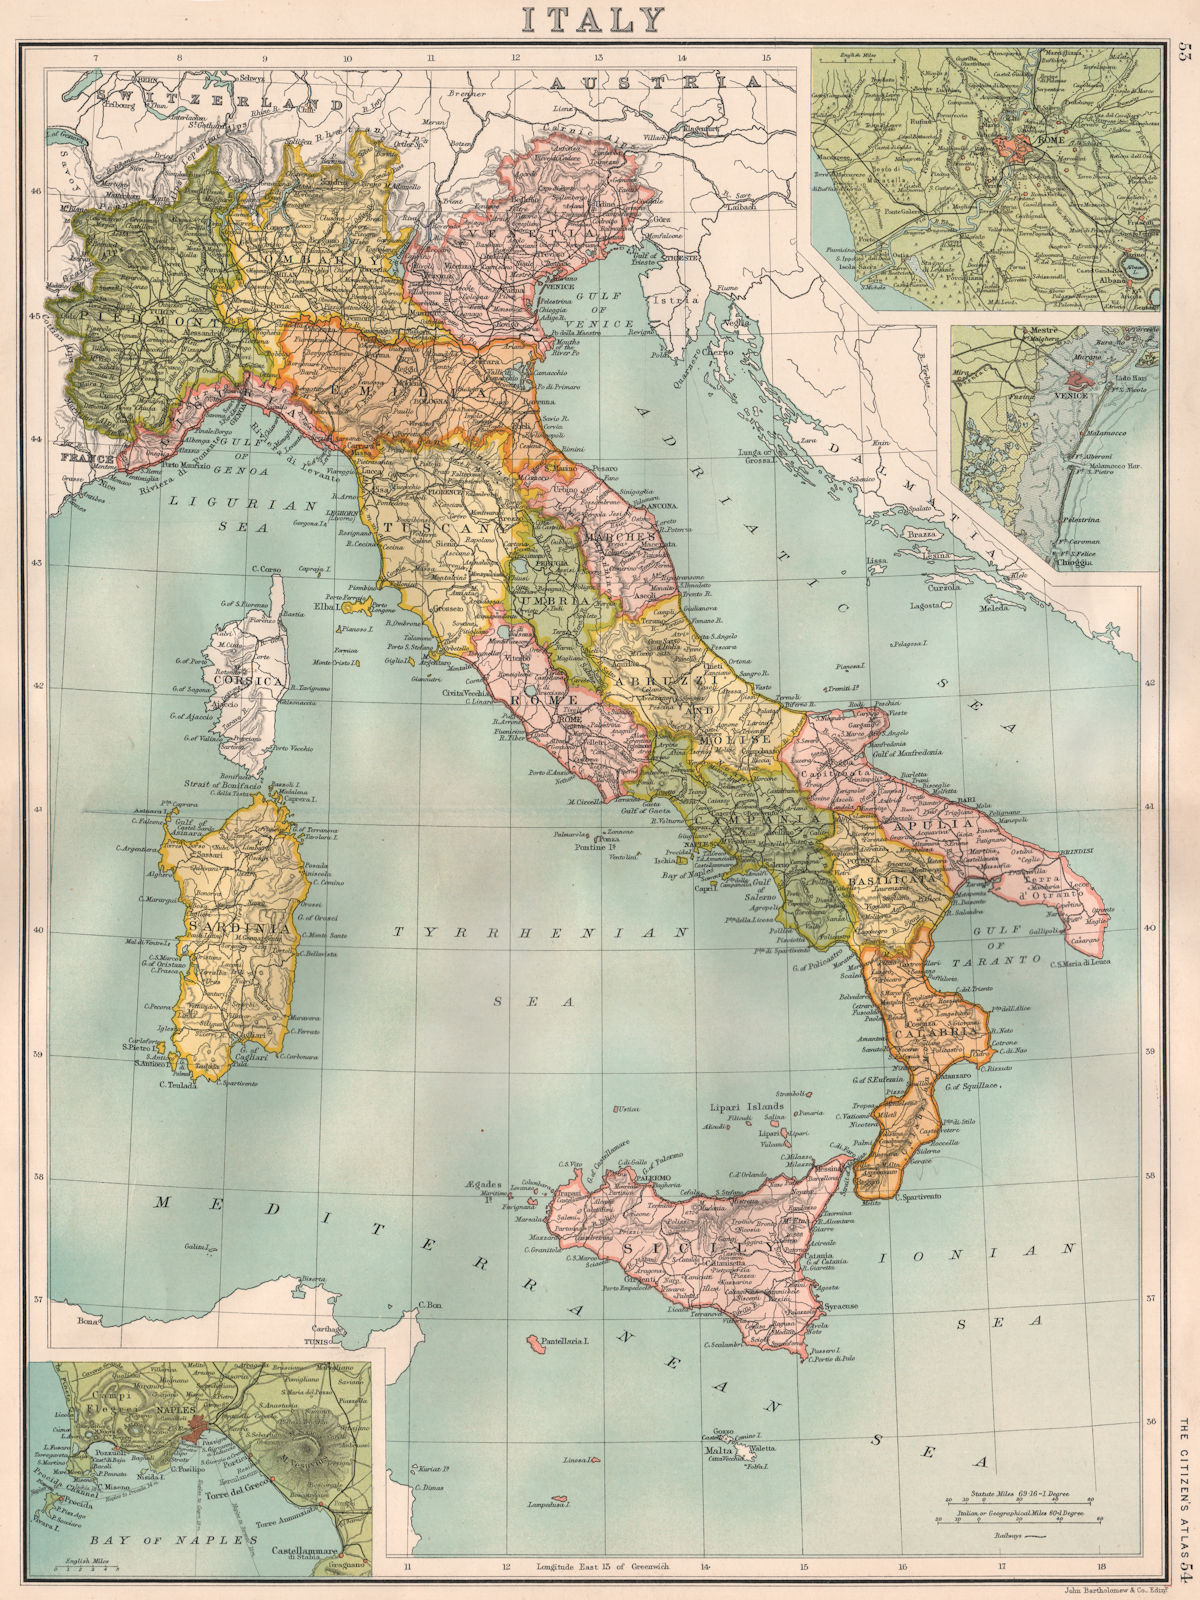 ITALY. before incorporation of South Tyrol & Trieste. BARTHOLOMEW 1898 old map